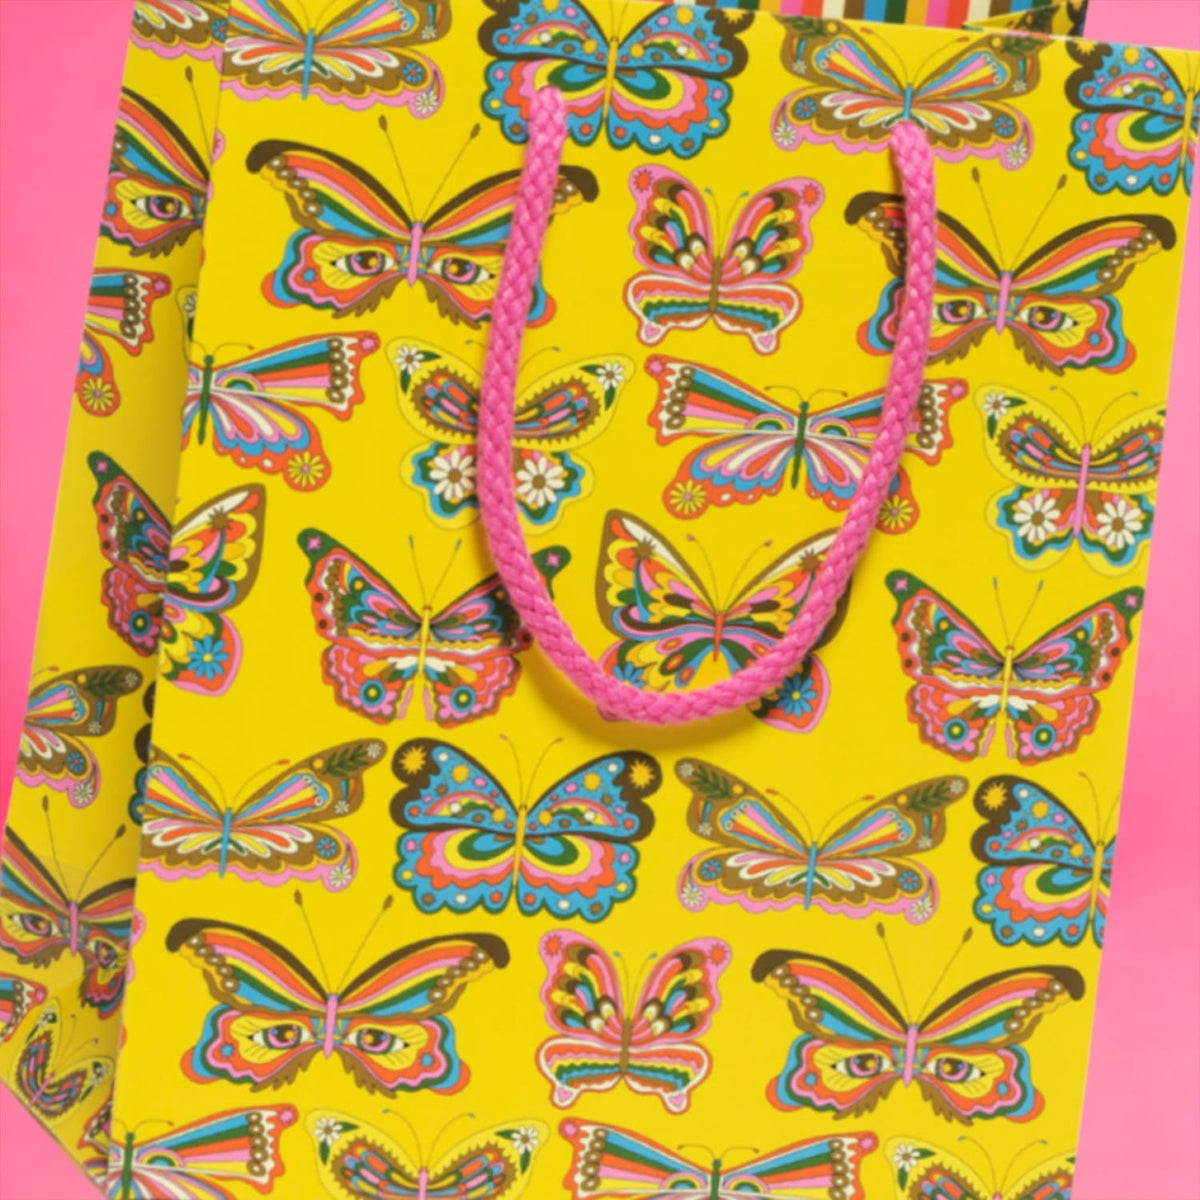 Small Gift Bag Bgs Psych Butterfly Per2375bgs Groupbycolor -